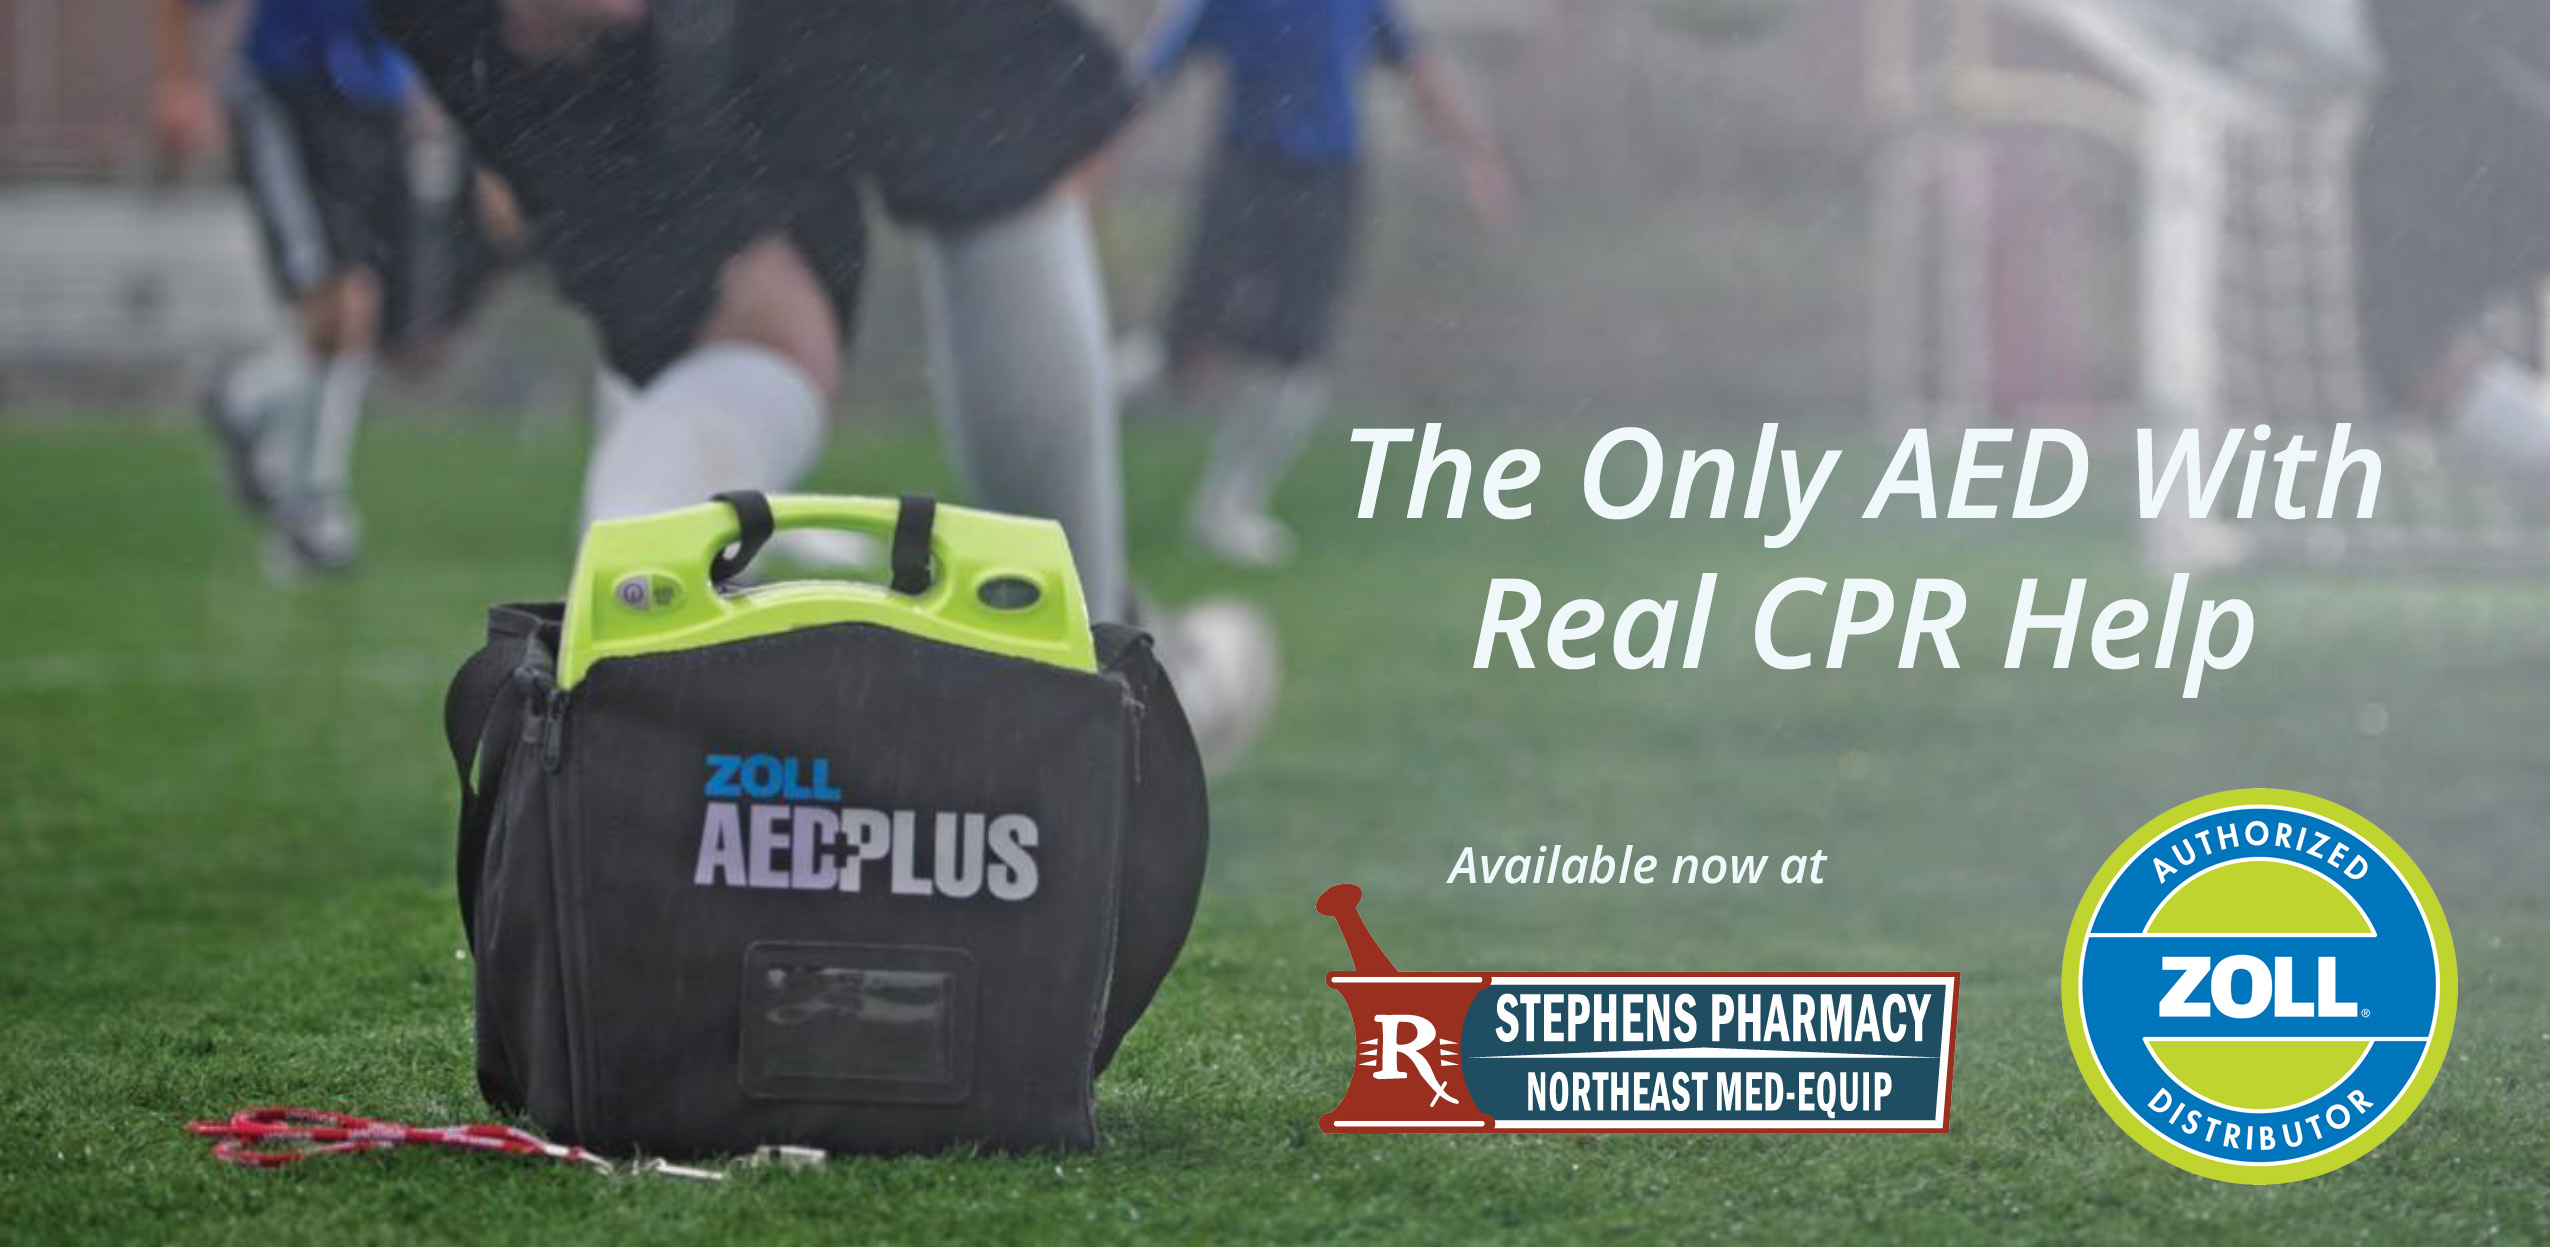 Zoll AED Plus available at Stephens Pharmacy and Northeast Med-Equip